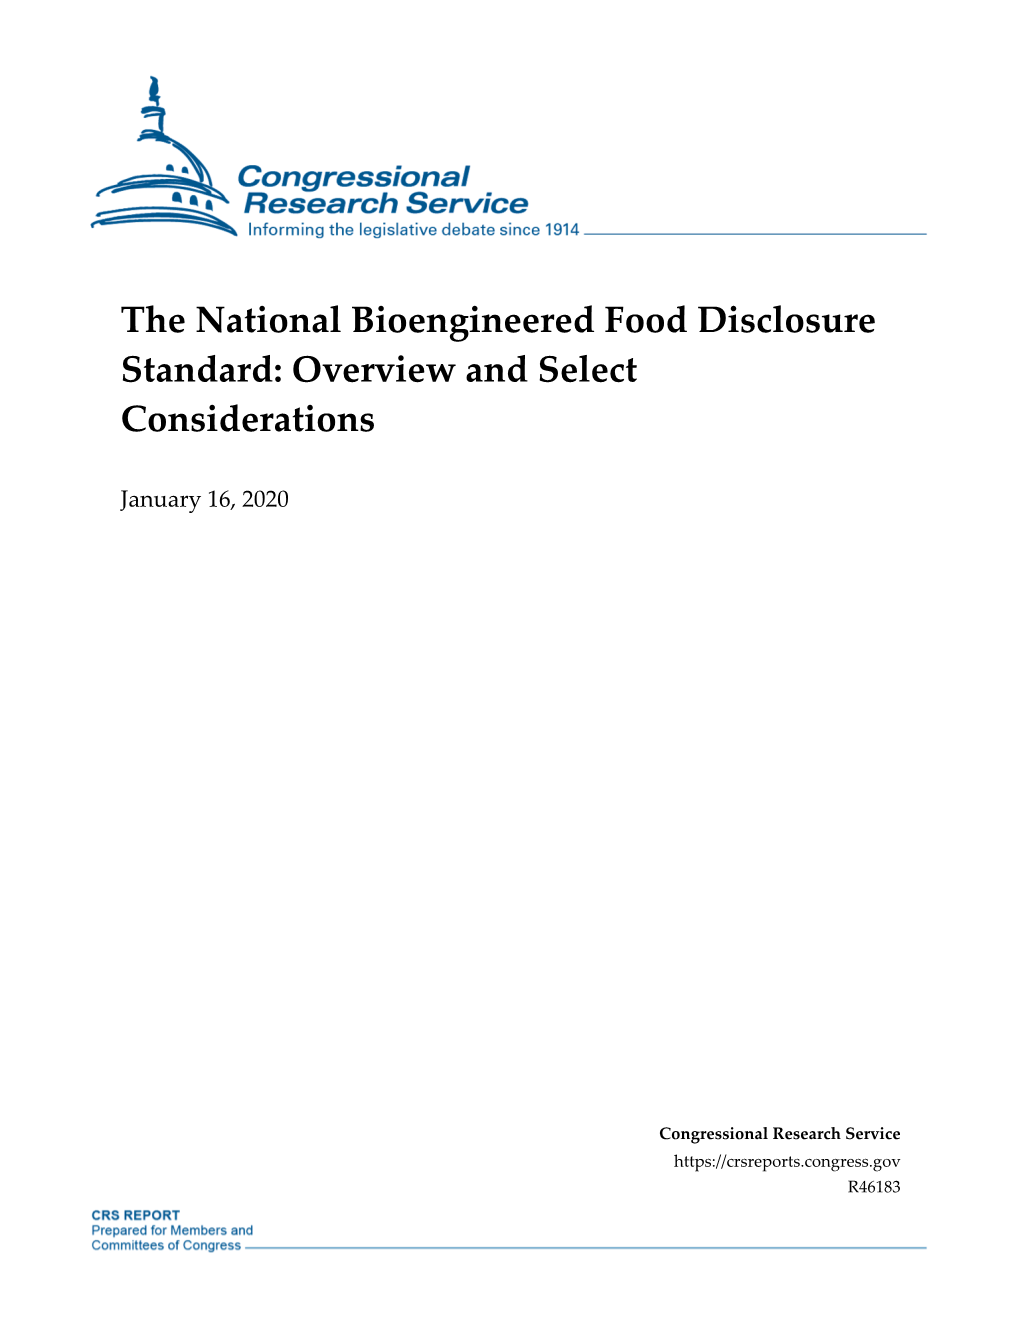 The National Bioengineered Food Disclosure Standard: Overview and Select Considerations